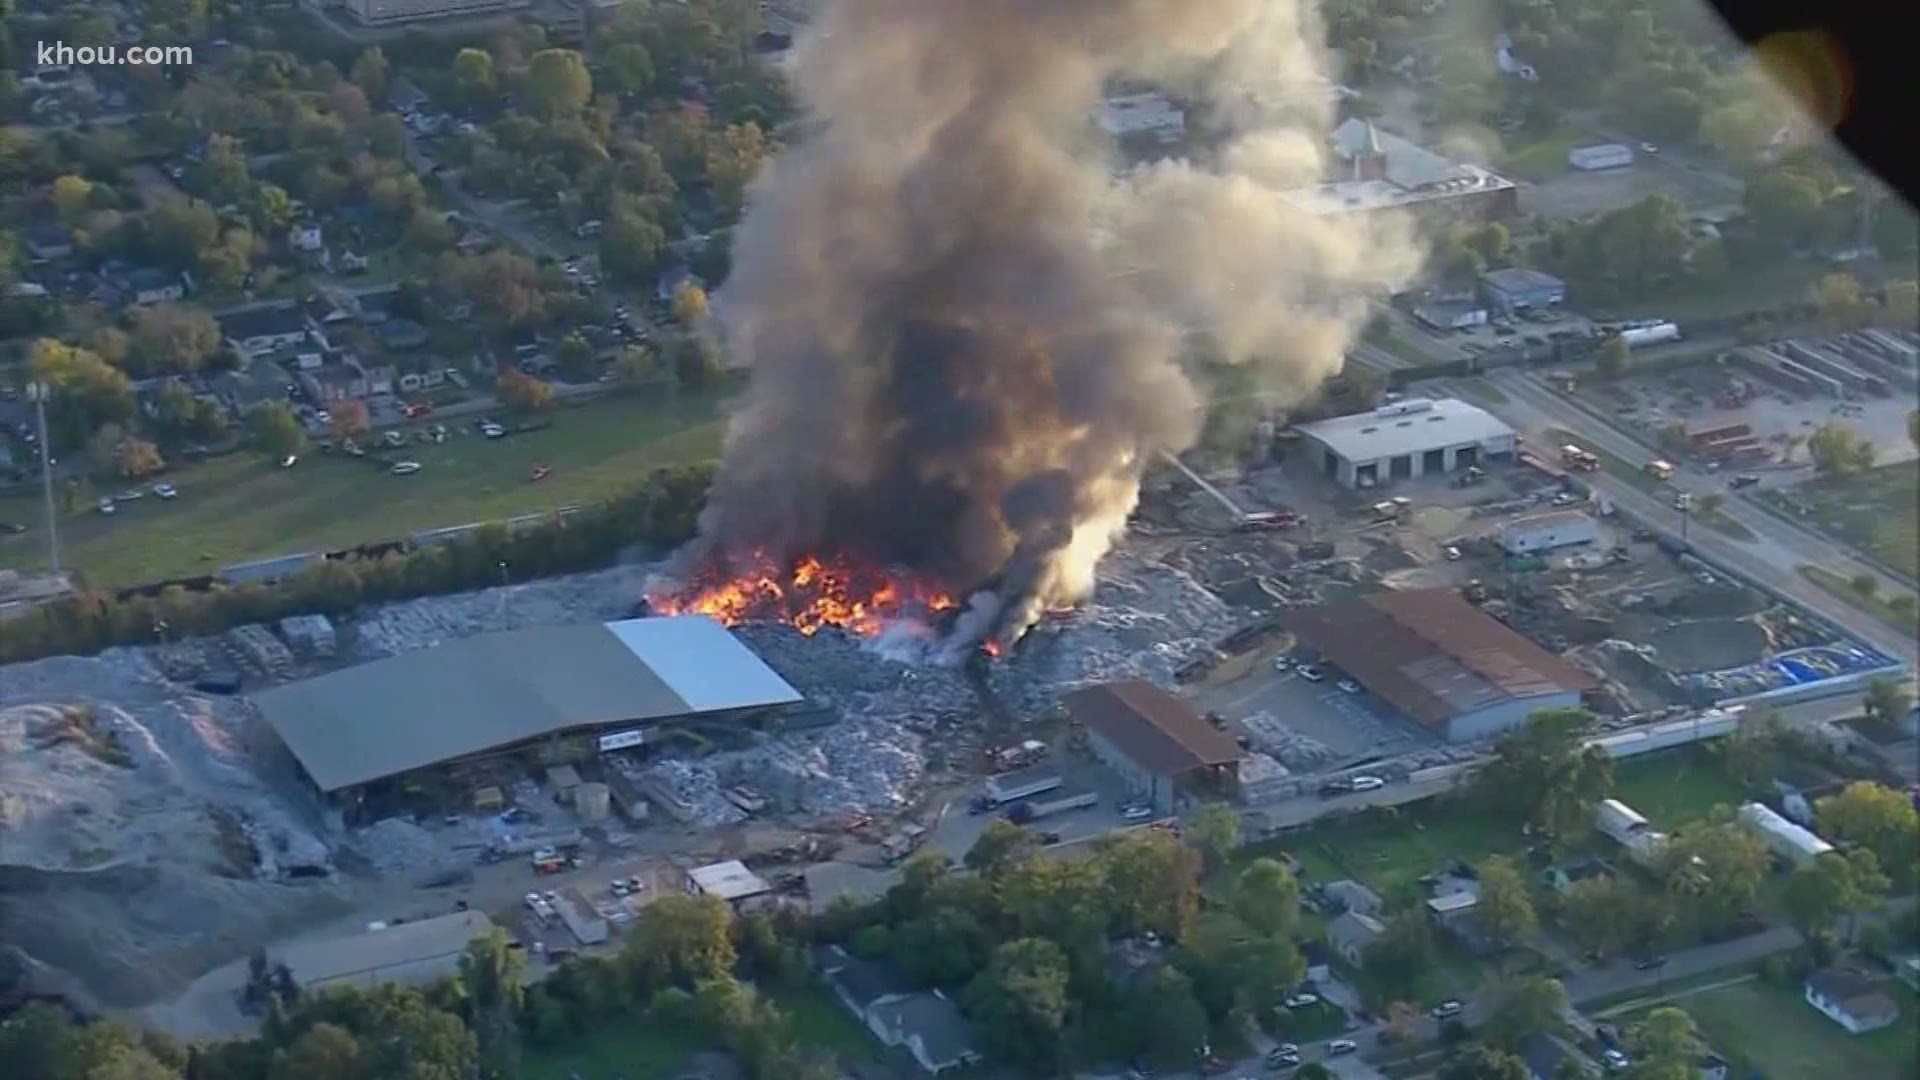 KHOU 11's Janel Forte reports the fire is now out, and the investigation is getting underway.